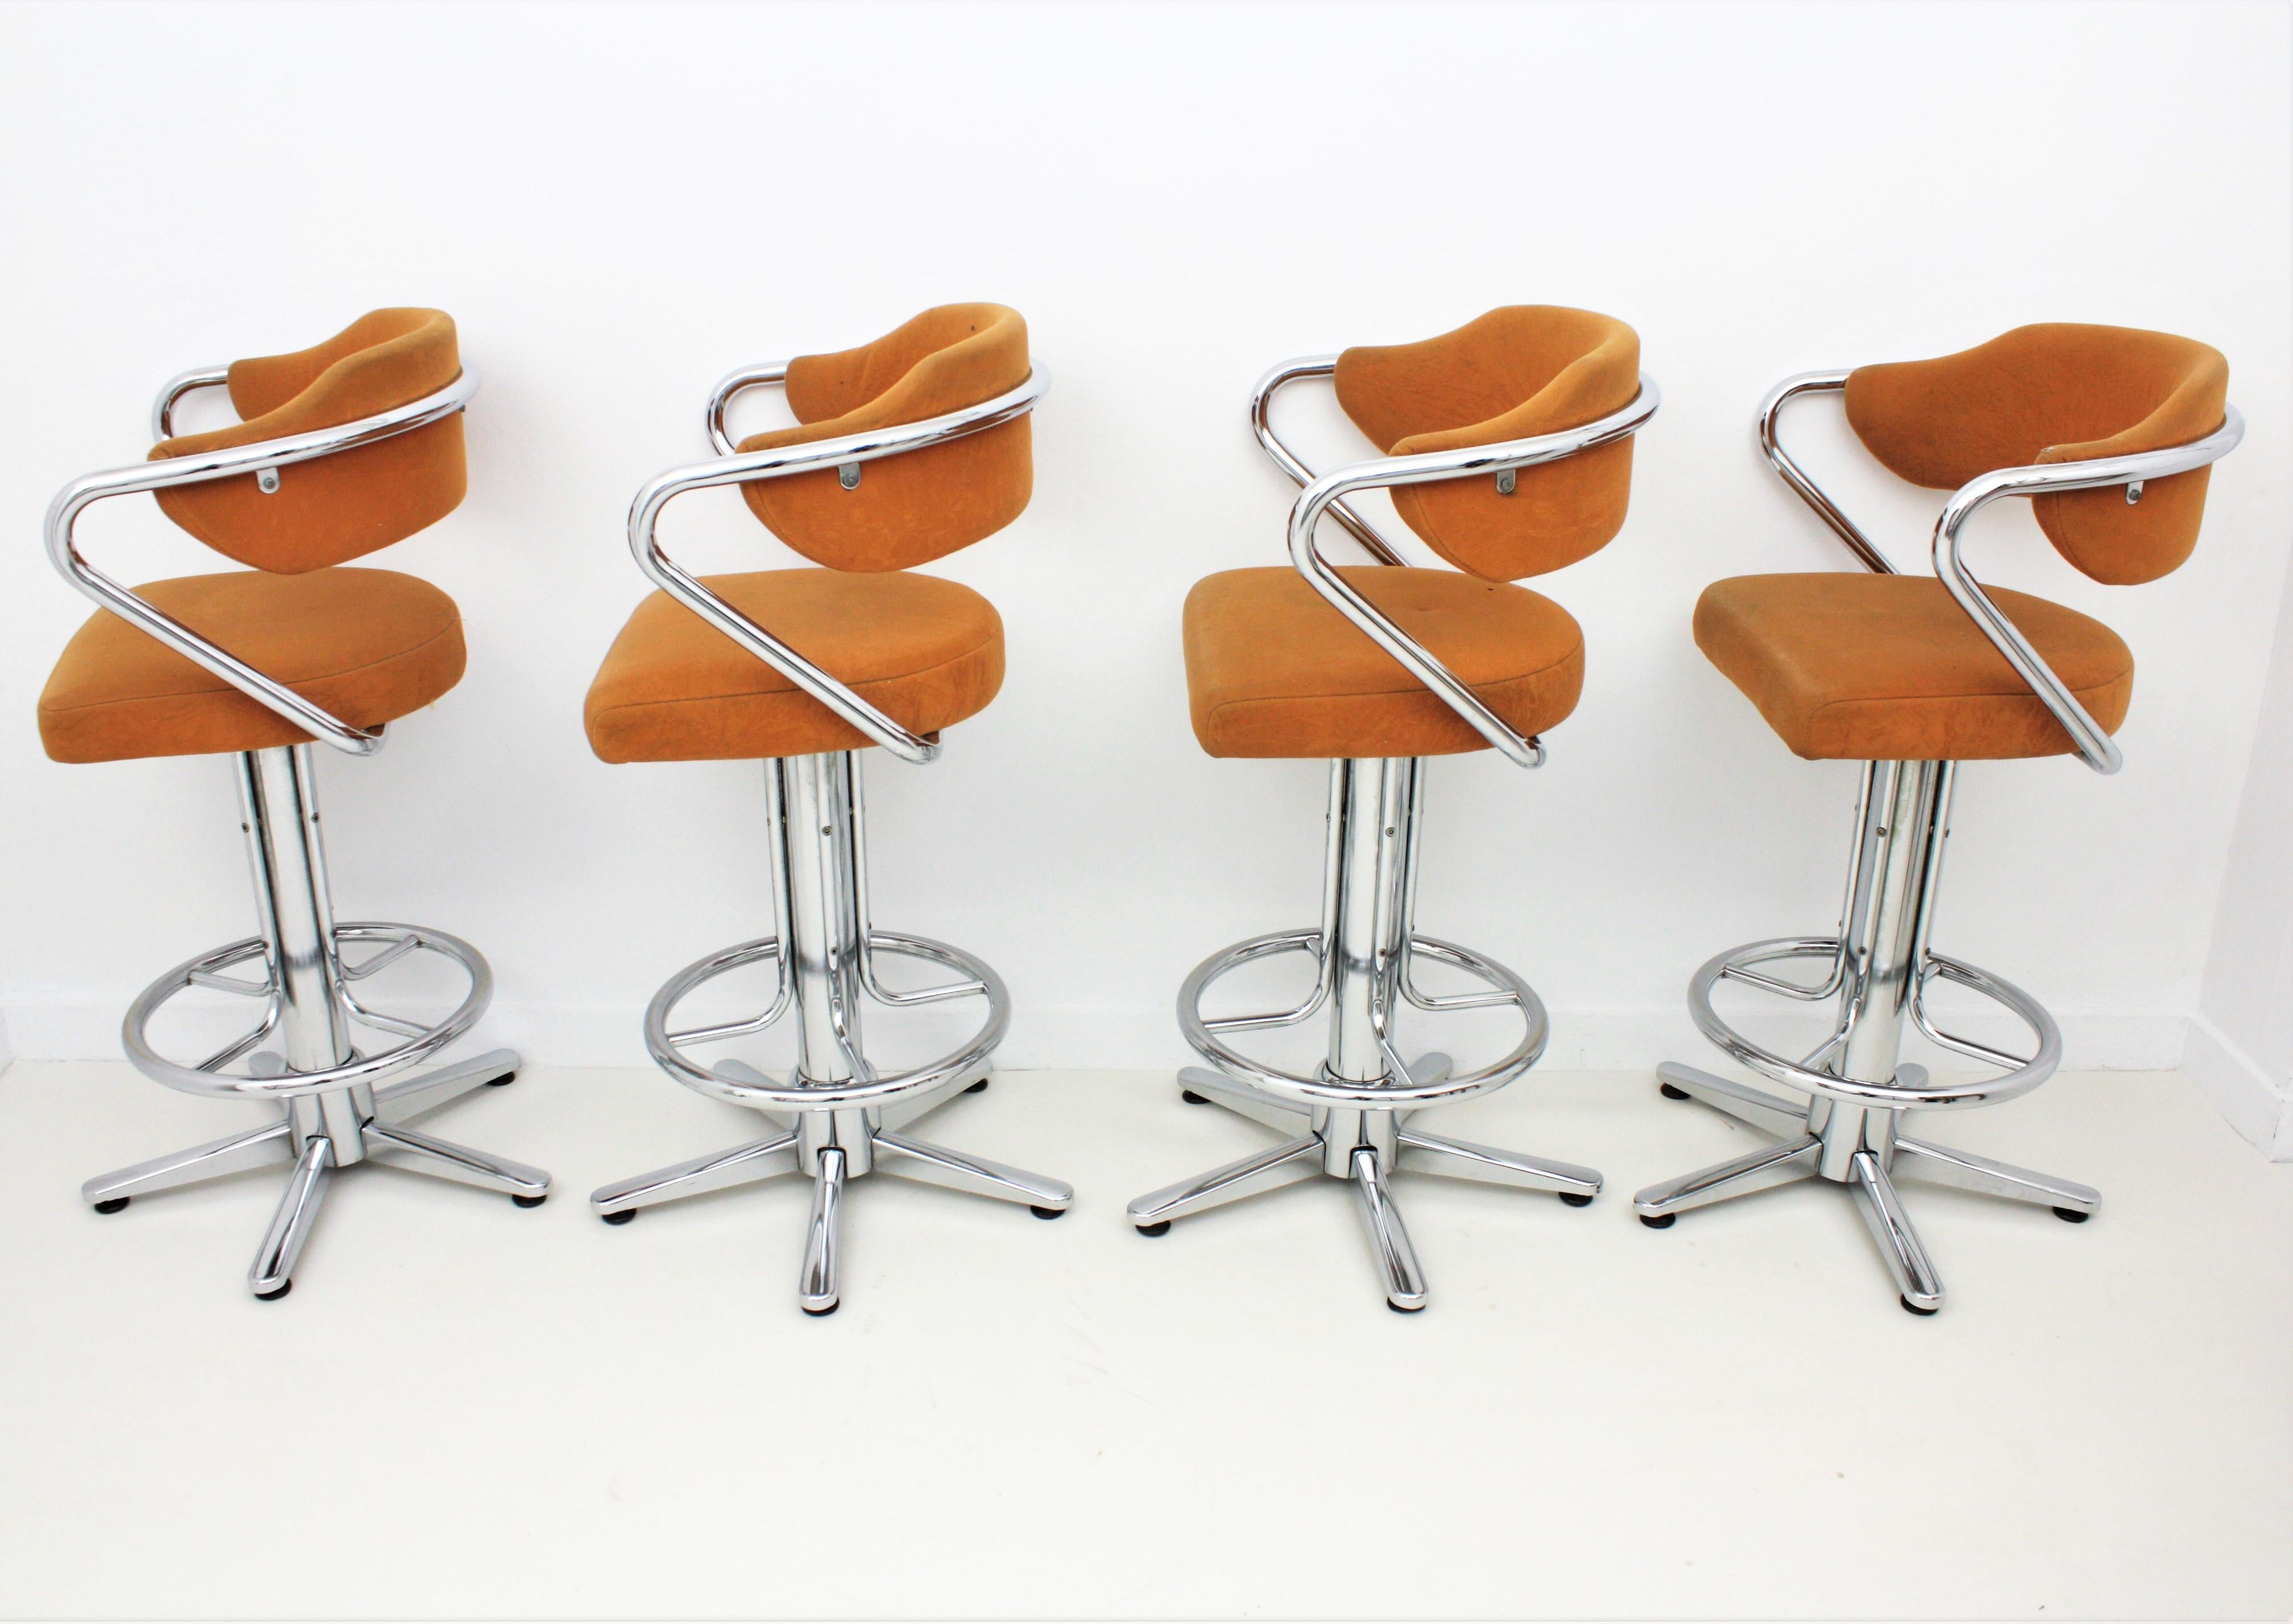 Set of four chromed steel swivel bar stools with arms, Spain, 1970s.
These bar stools with arms are very comfortable with their soft seats, backs, arms and circular footrests. They have a five footed base.
Very well constructed, strong structure